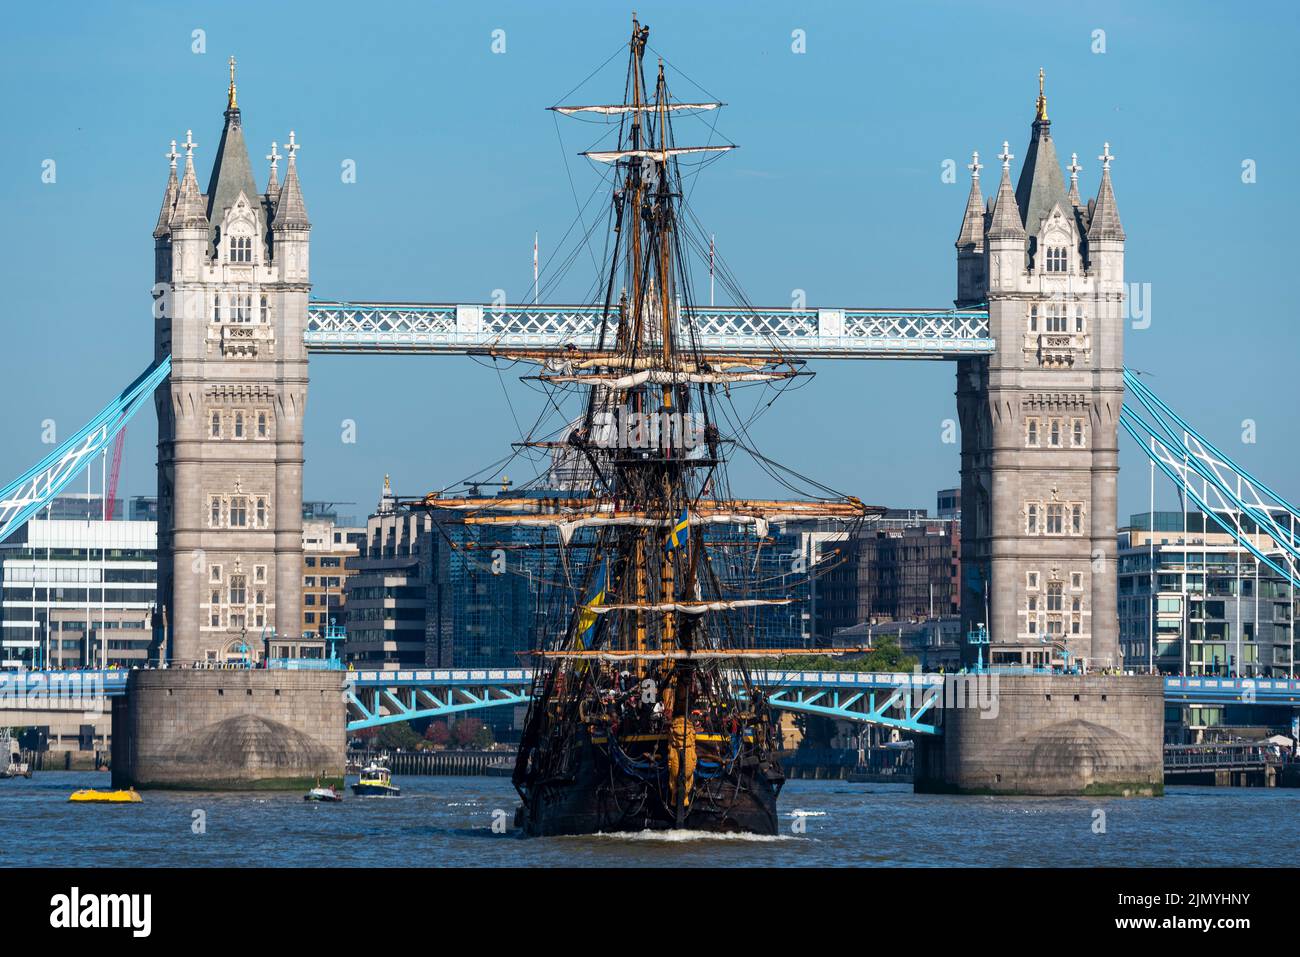 Tower Bridge, London, UK. 8th Aug, 2022. Gotheborg of Sweden is a sailing replica of the Swedish East Indiaman Gotheborg I, launched in 1738, and is visiting London to welcome visitors on board. The wooden replica ship was launched in 2003 and last visited London in 2007. It has navigated up the River Thames in the morning to pass under the opened Tower Bridge before turning and passing back under and heading for Thames Quay in Canary Wharf, where it will be open to visitors. Heading down river after passing under Tower Bridge Stock Photo